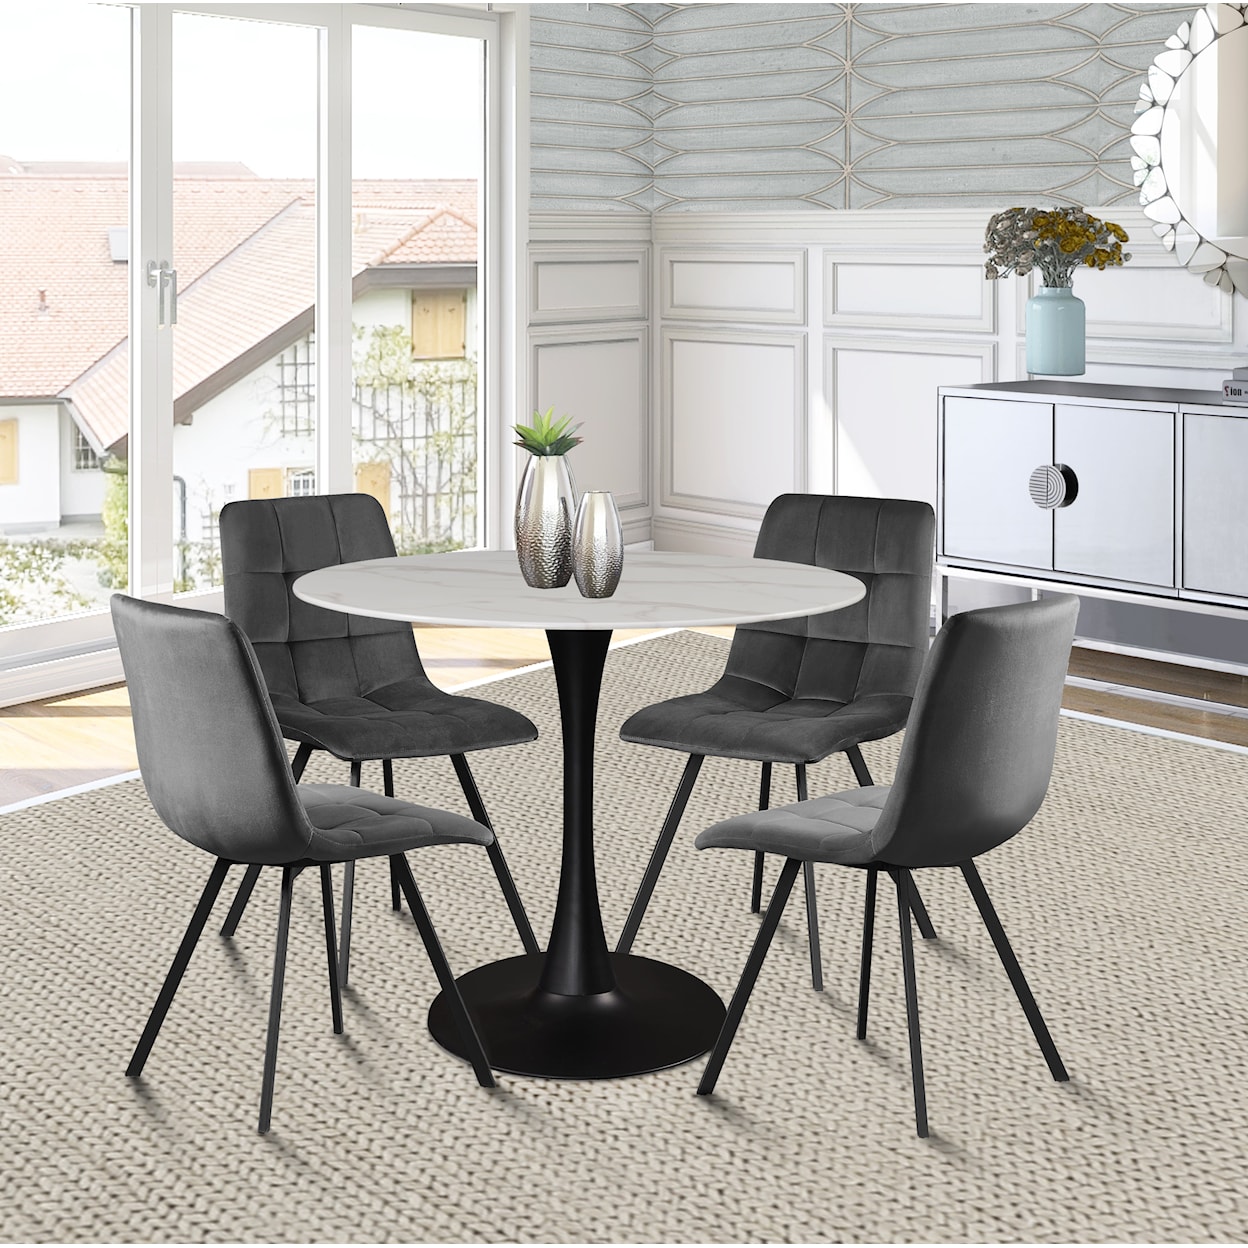 Meridian Furniture Tulip Dining Table (3 Boxes)